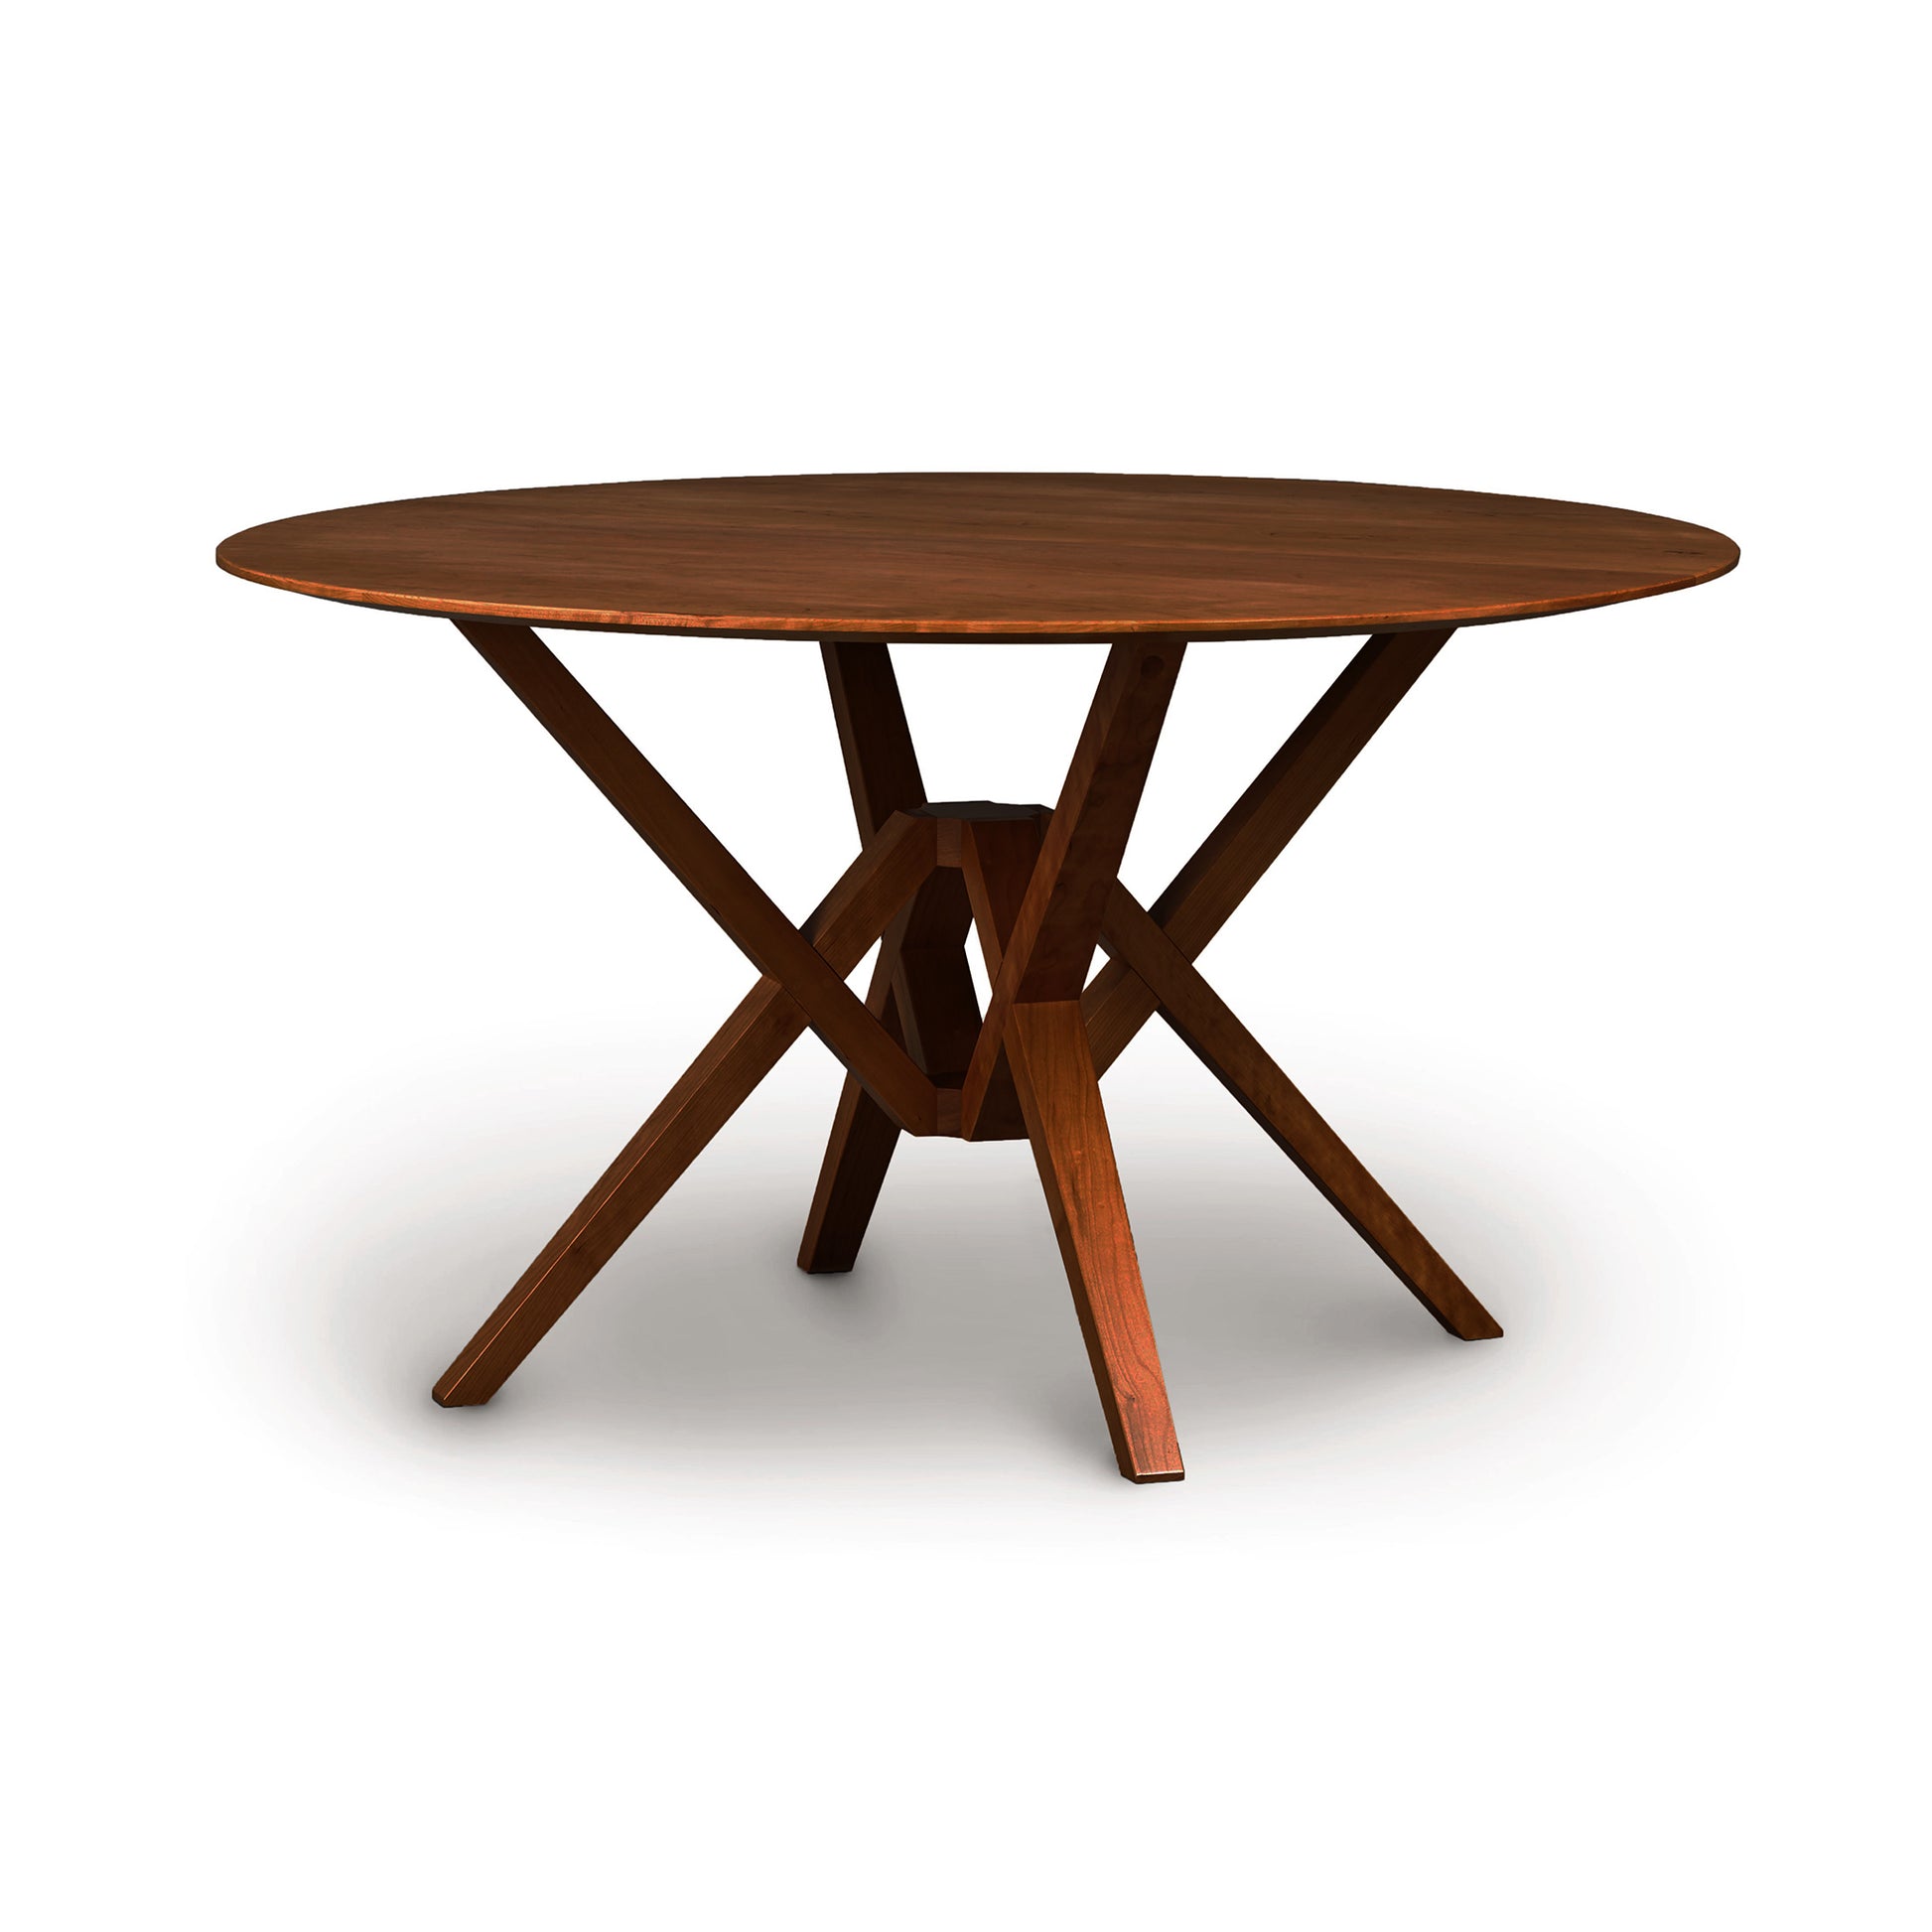 A sustainably harvested hardwood Exeter Round Solid Top Dining Table by Copeland Furniture with a cross-leg support design, isolated on a white background.